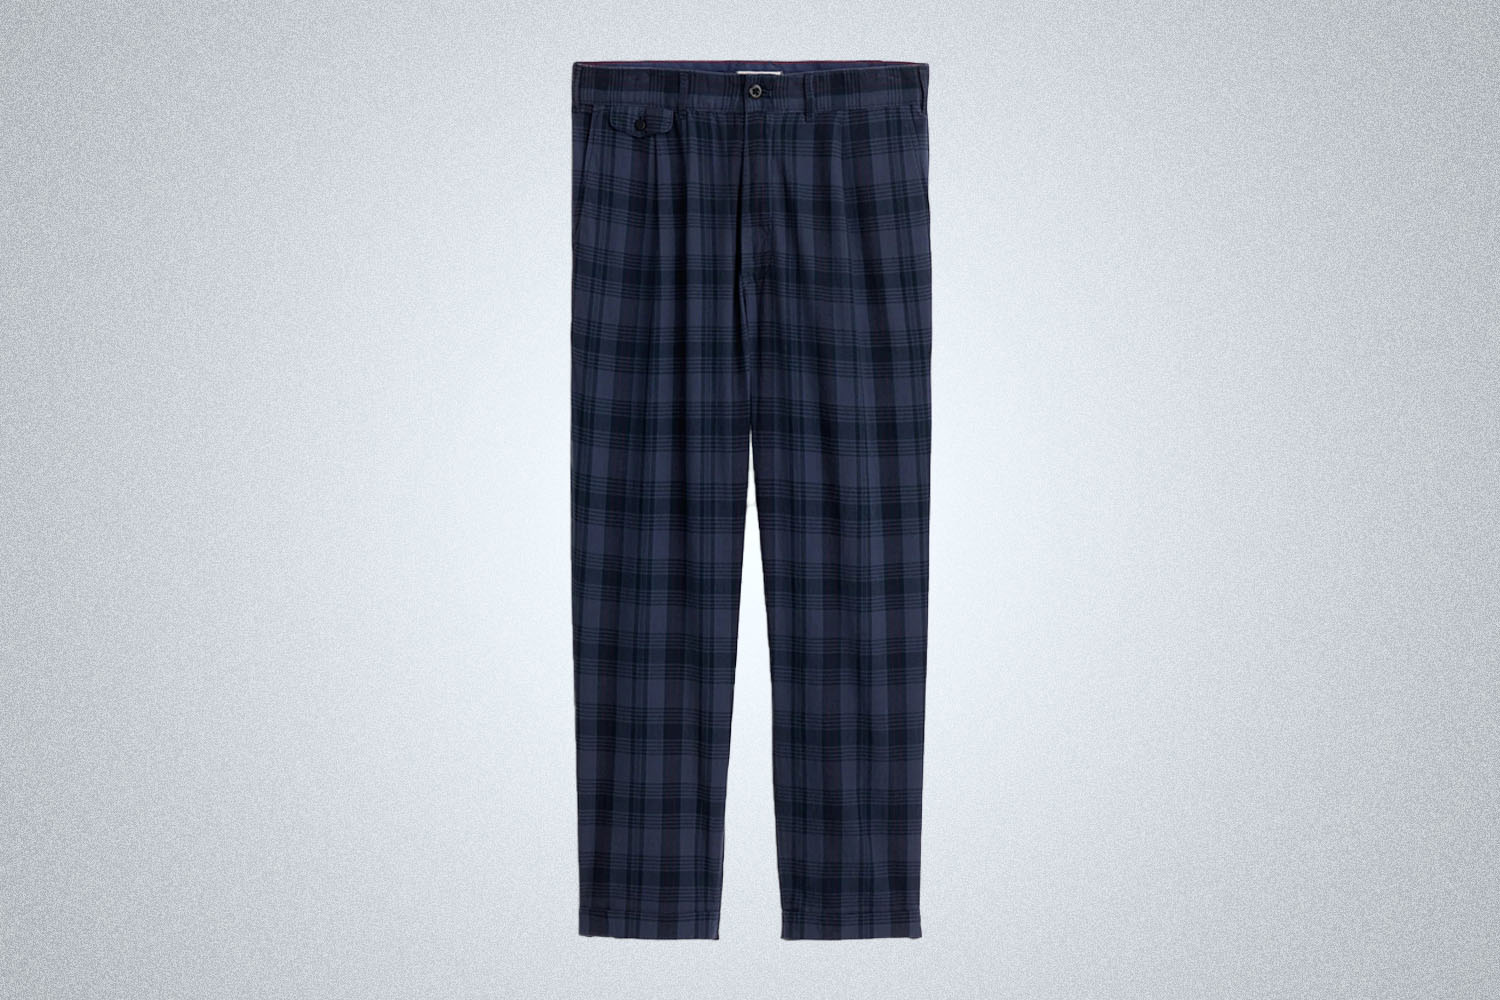 a pair of blue madras pleated pants from Alex Mill on a grey background